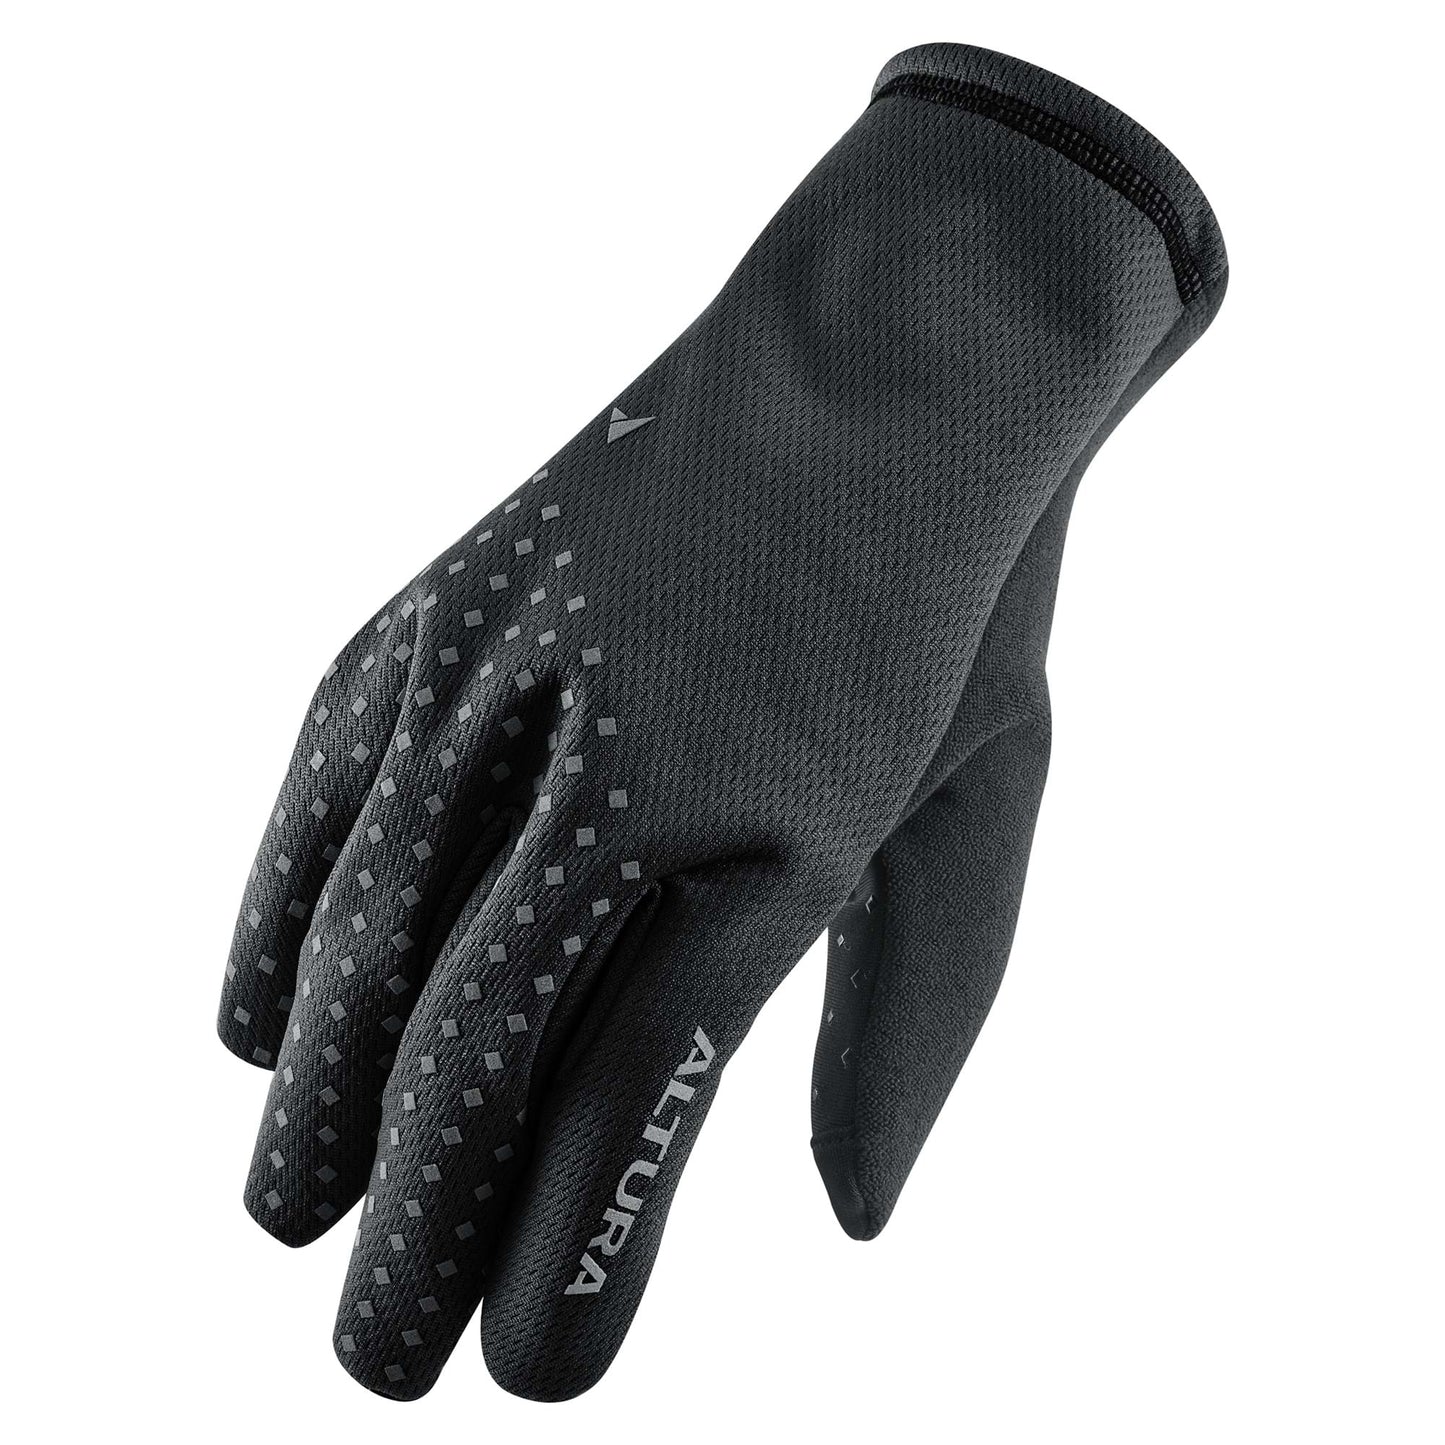 ALTURA NIGHTVISION UNISEX WINDPROOF FLEECE CYCLING GLOVES